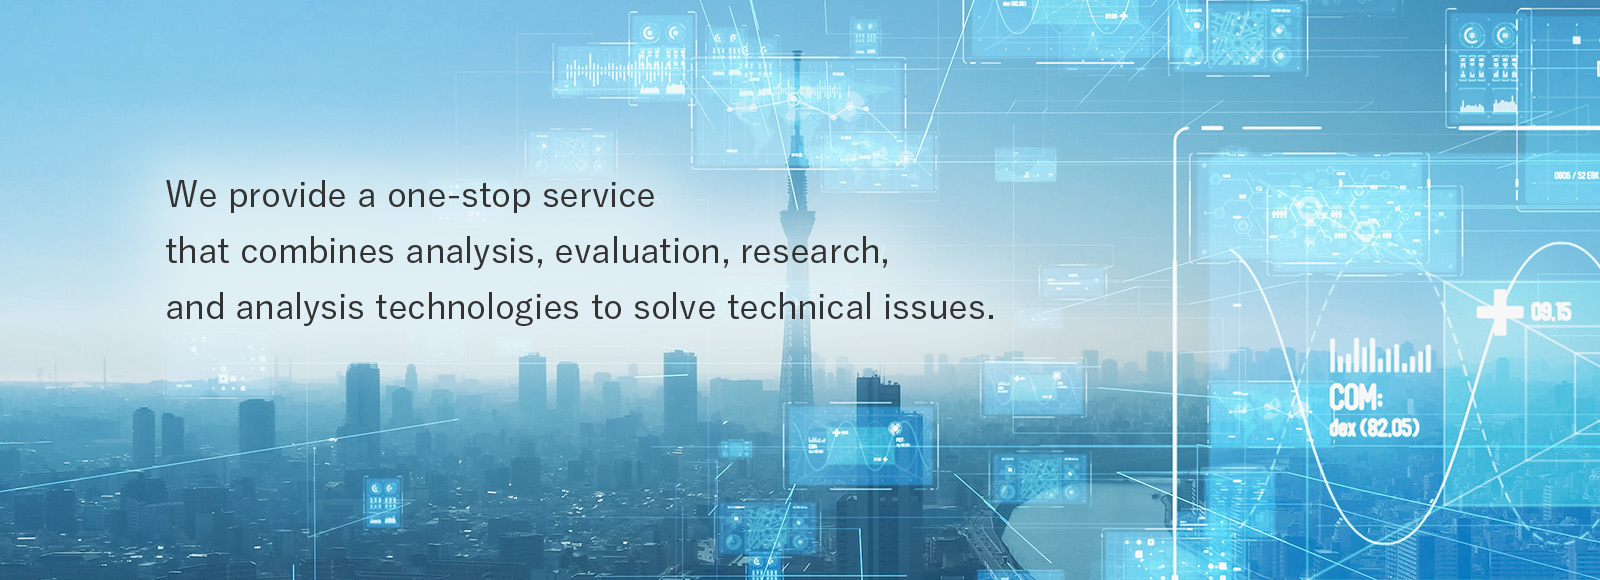 We provide a one-stop service that combines analysis, evaluation, research, and analysis technologies to solve technical issues.